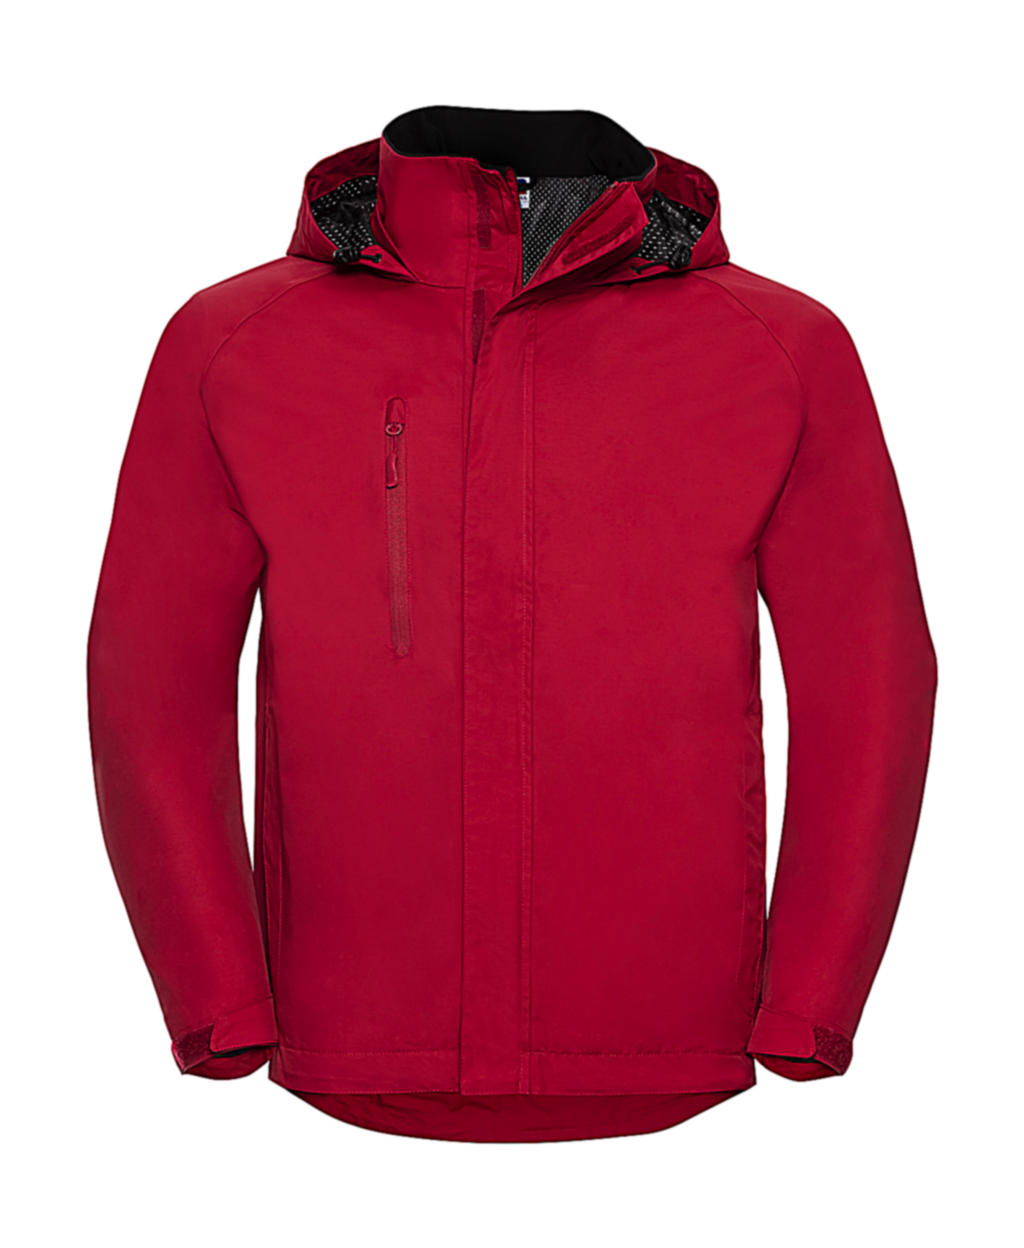  HydraPlus 2000 Jacket in Farbe Classic Red